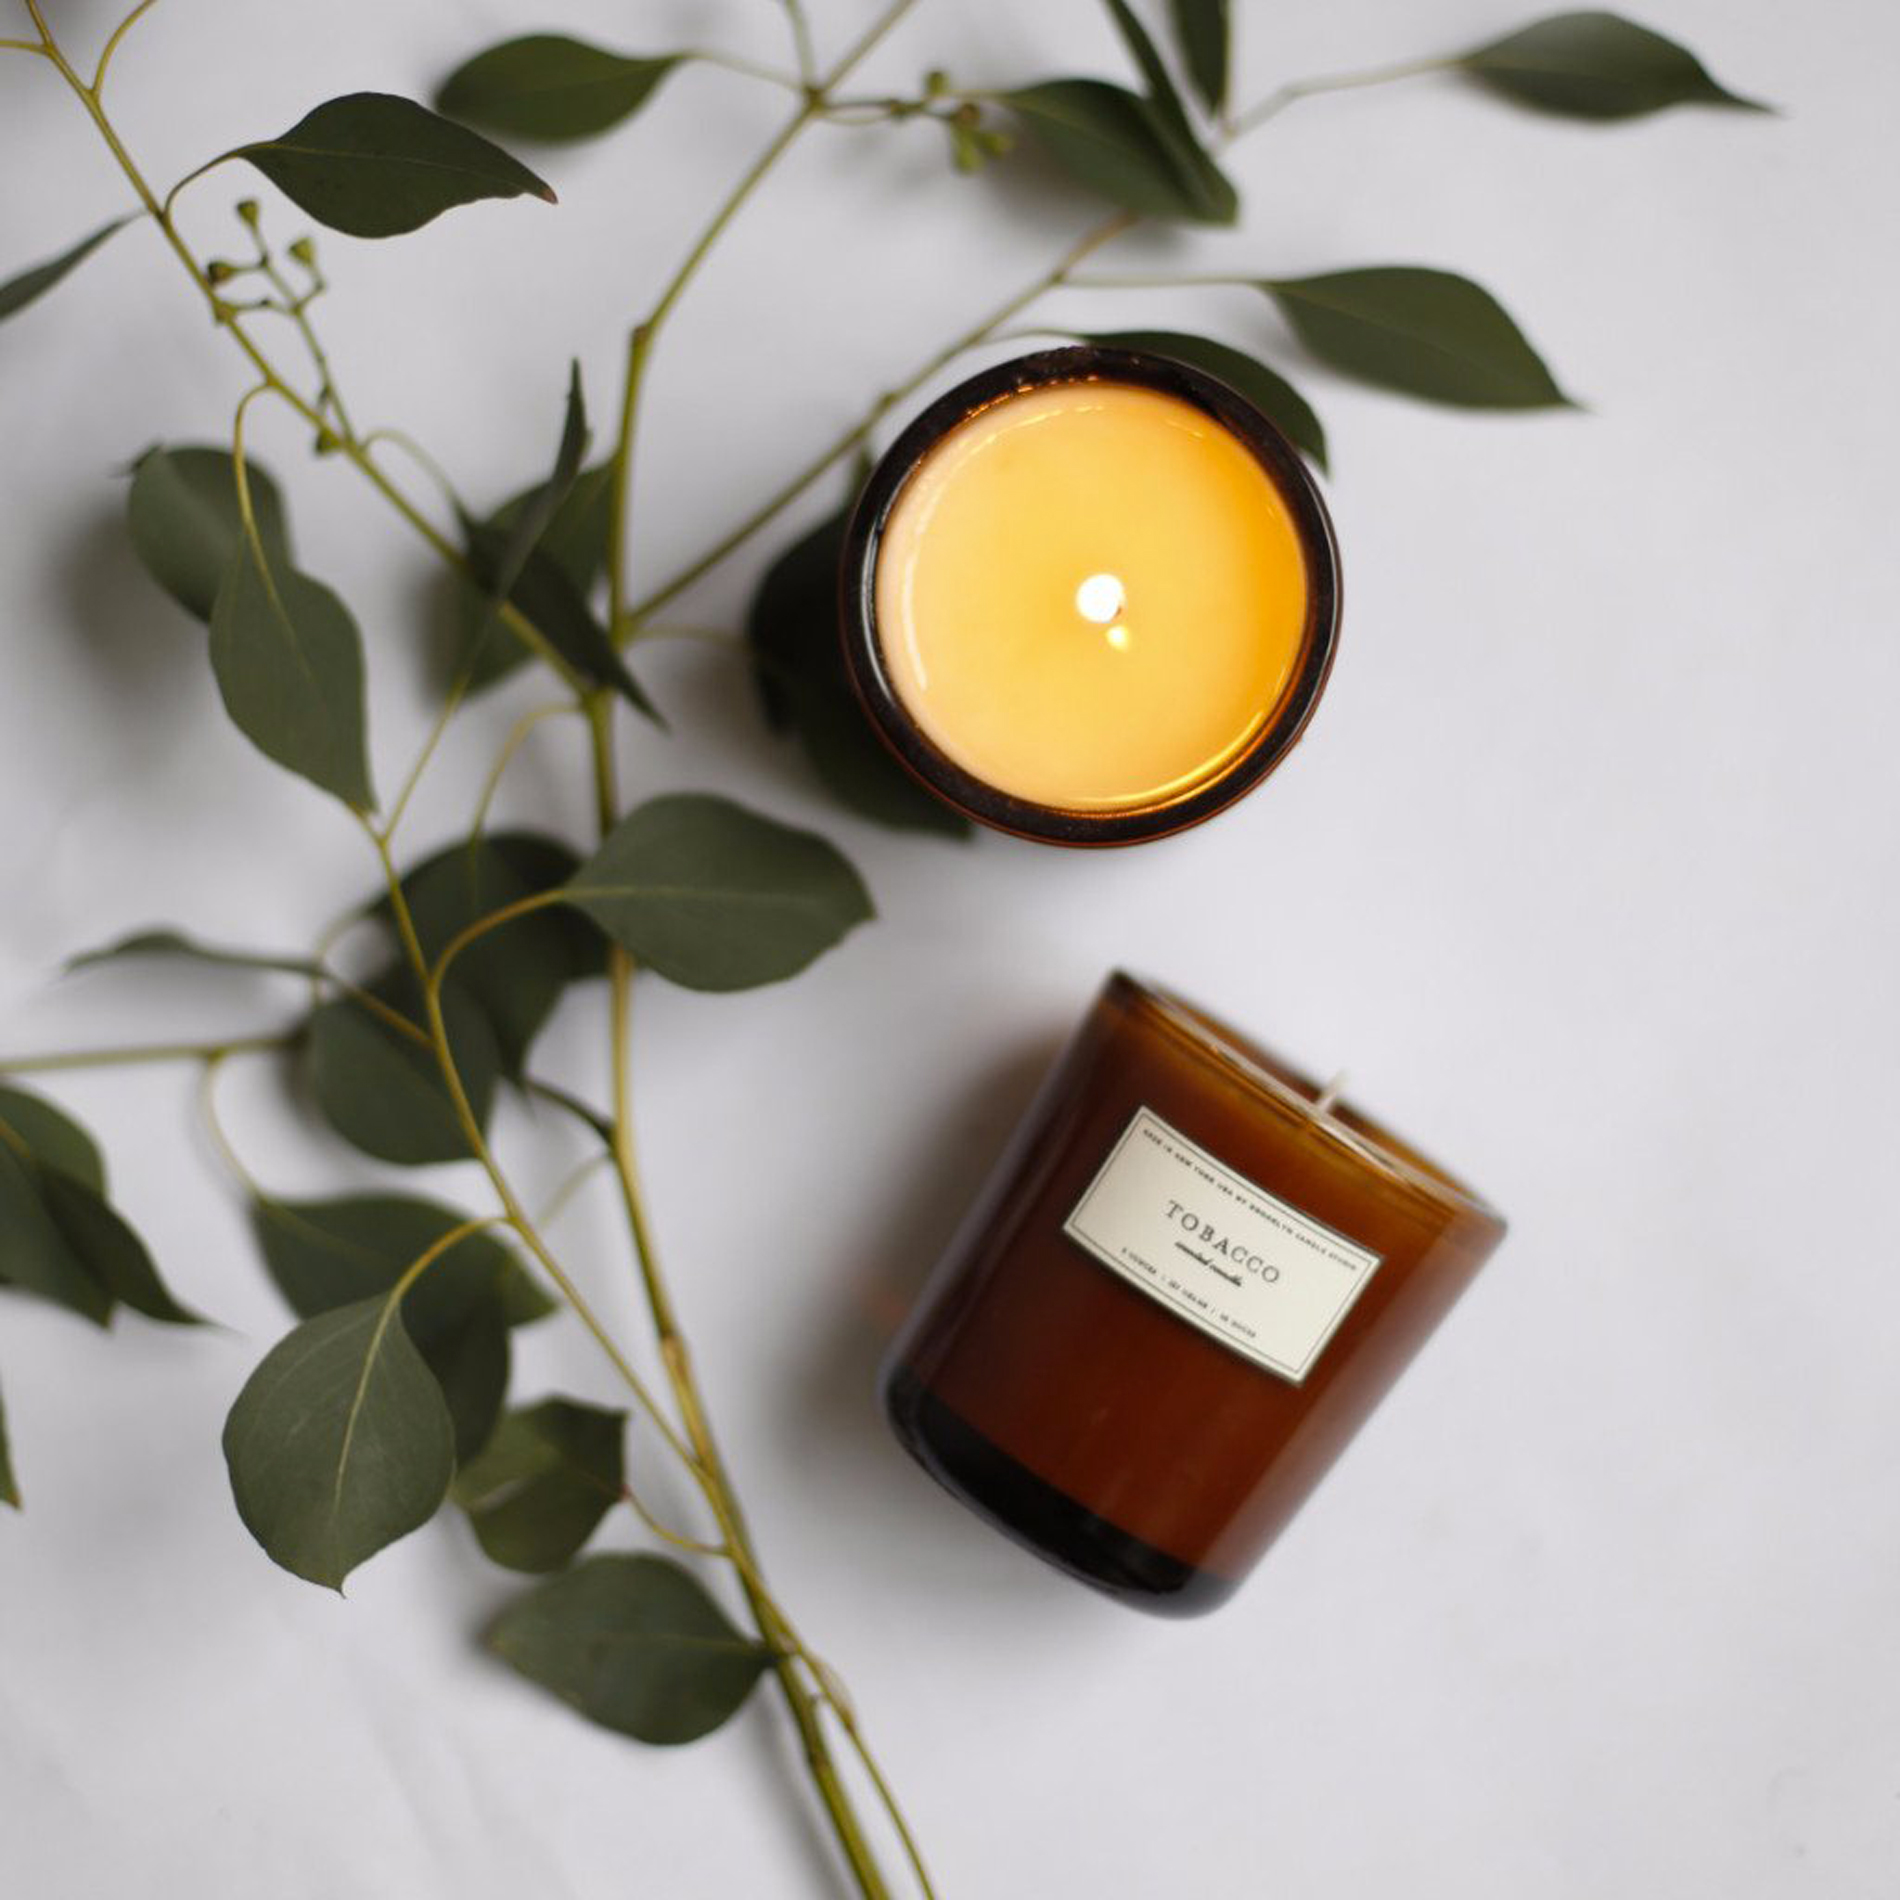 9 of the best scented candles you need to try.